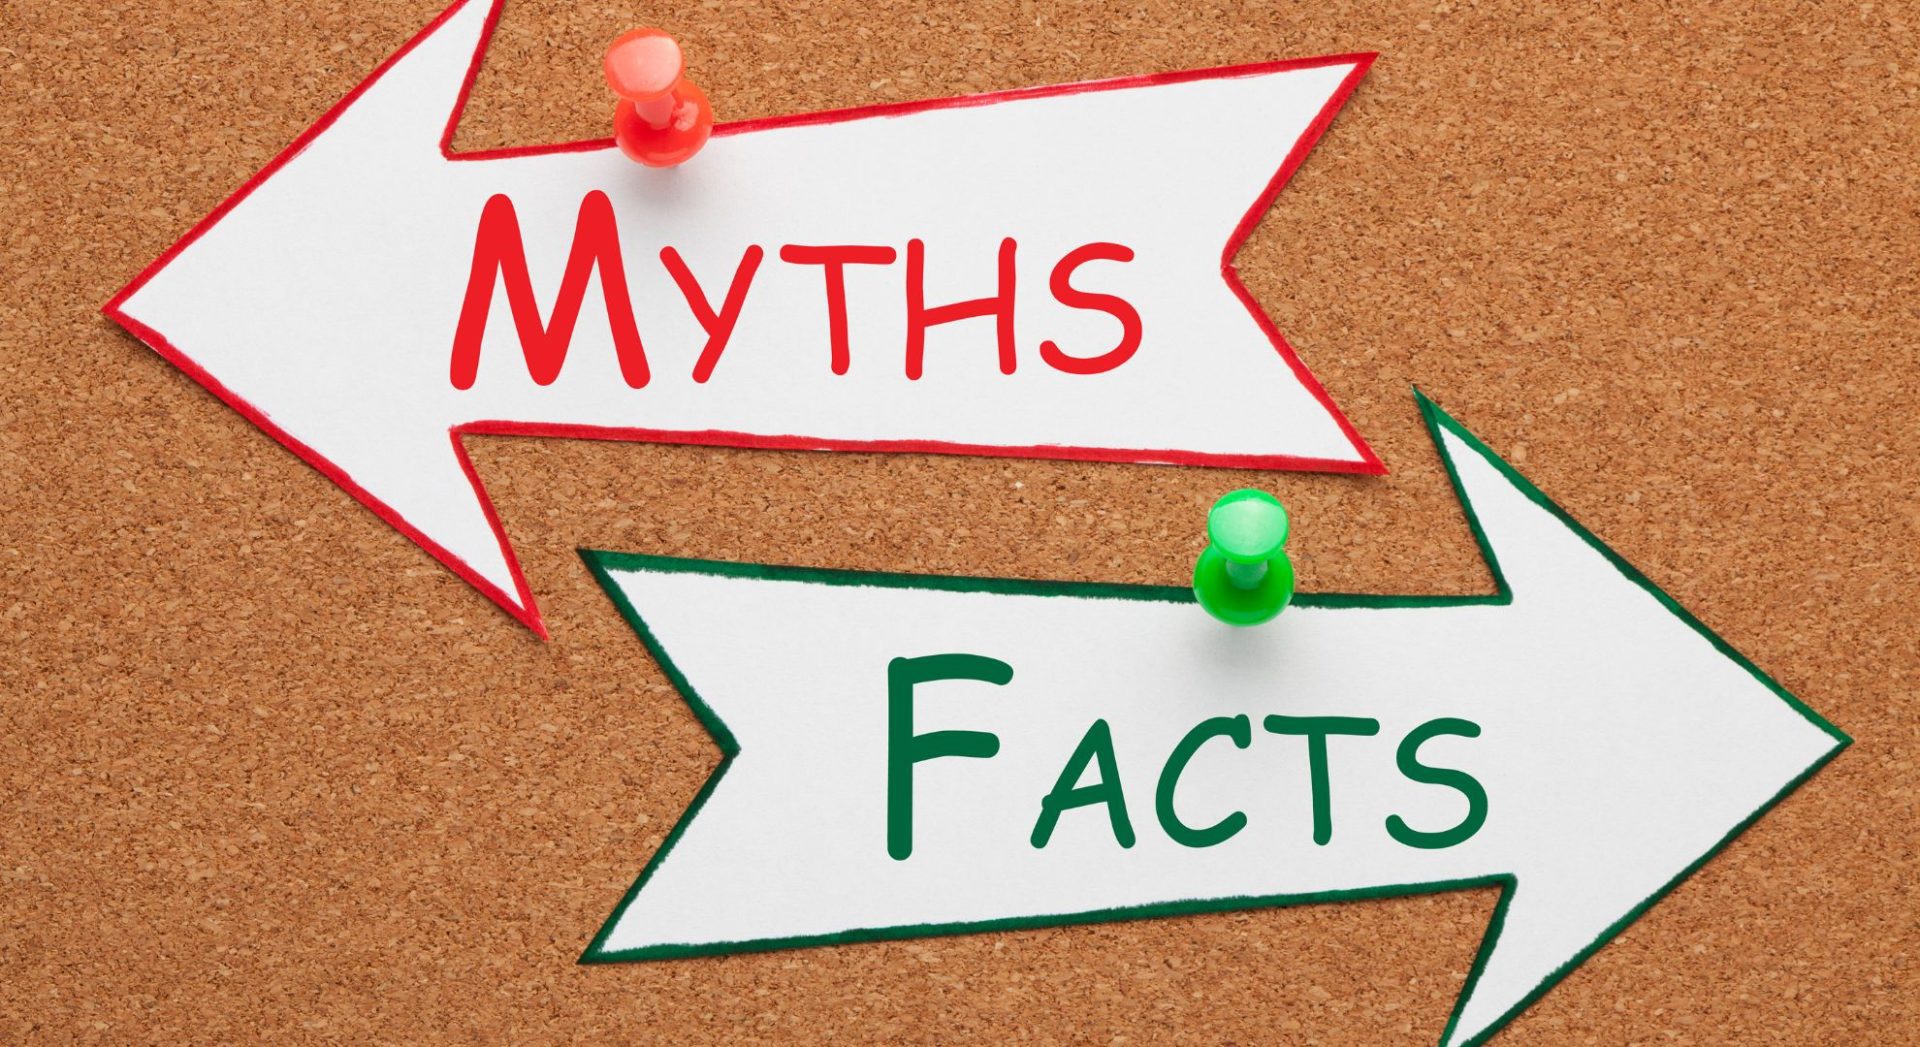 plumber perth myths and facts